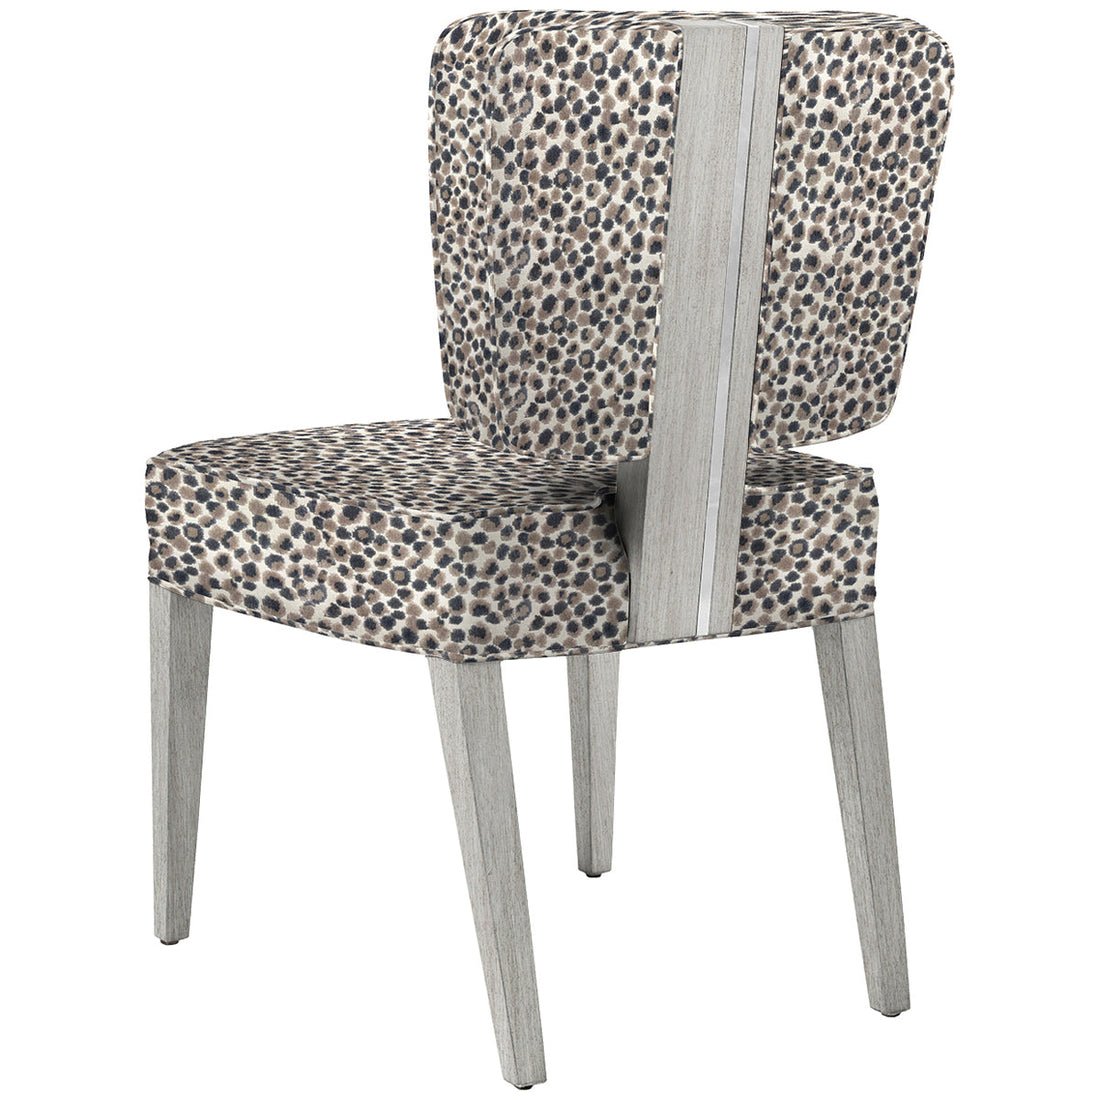 Belle Meade Signature Claire Dining Chair